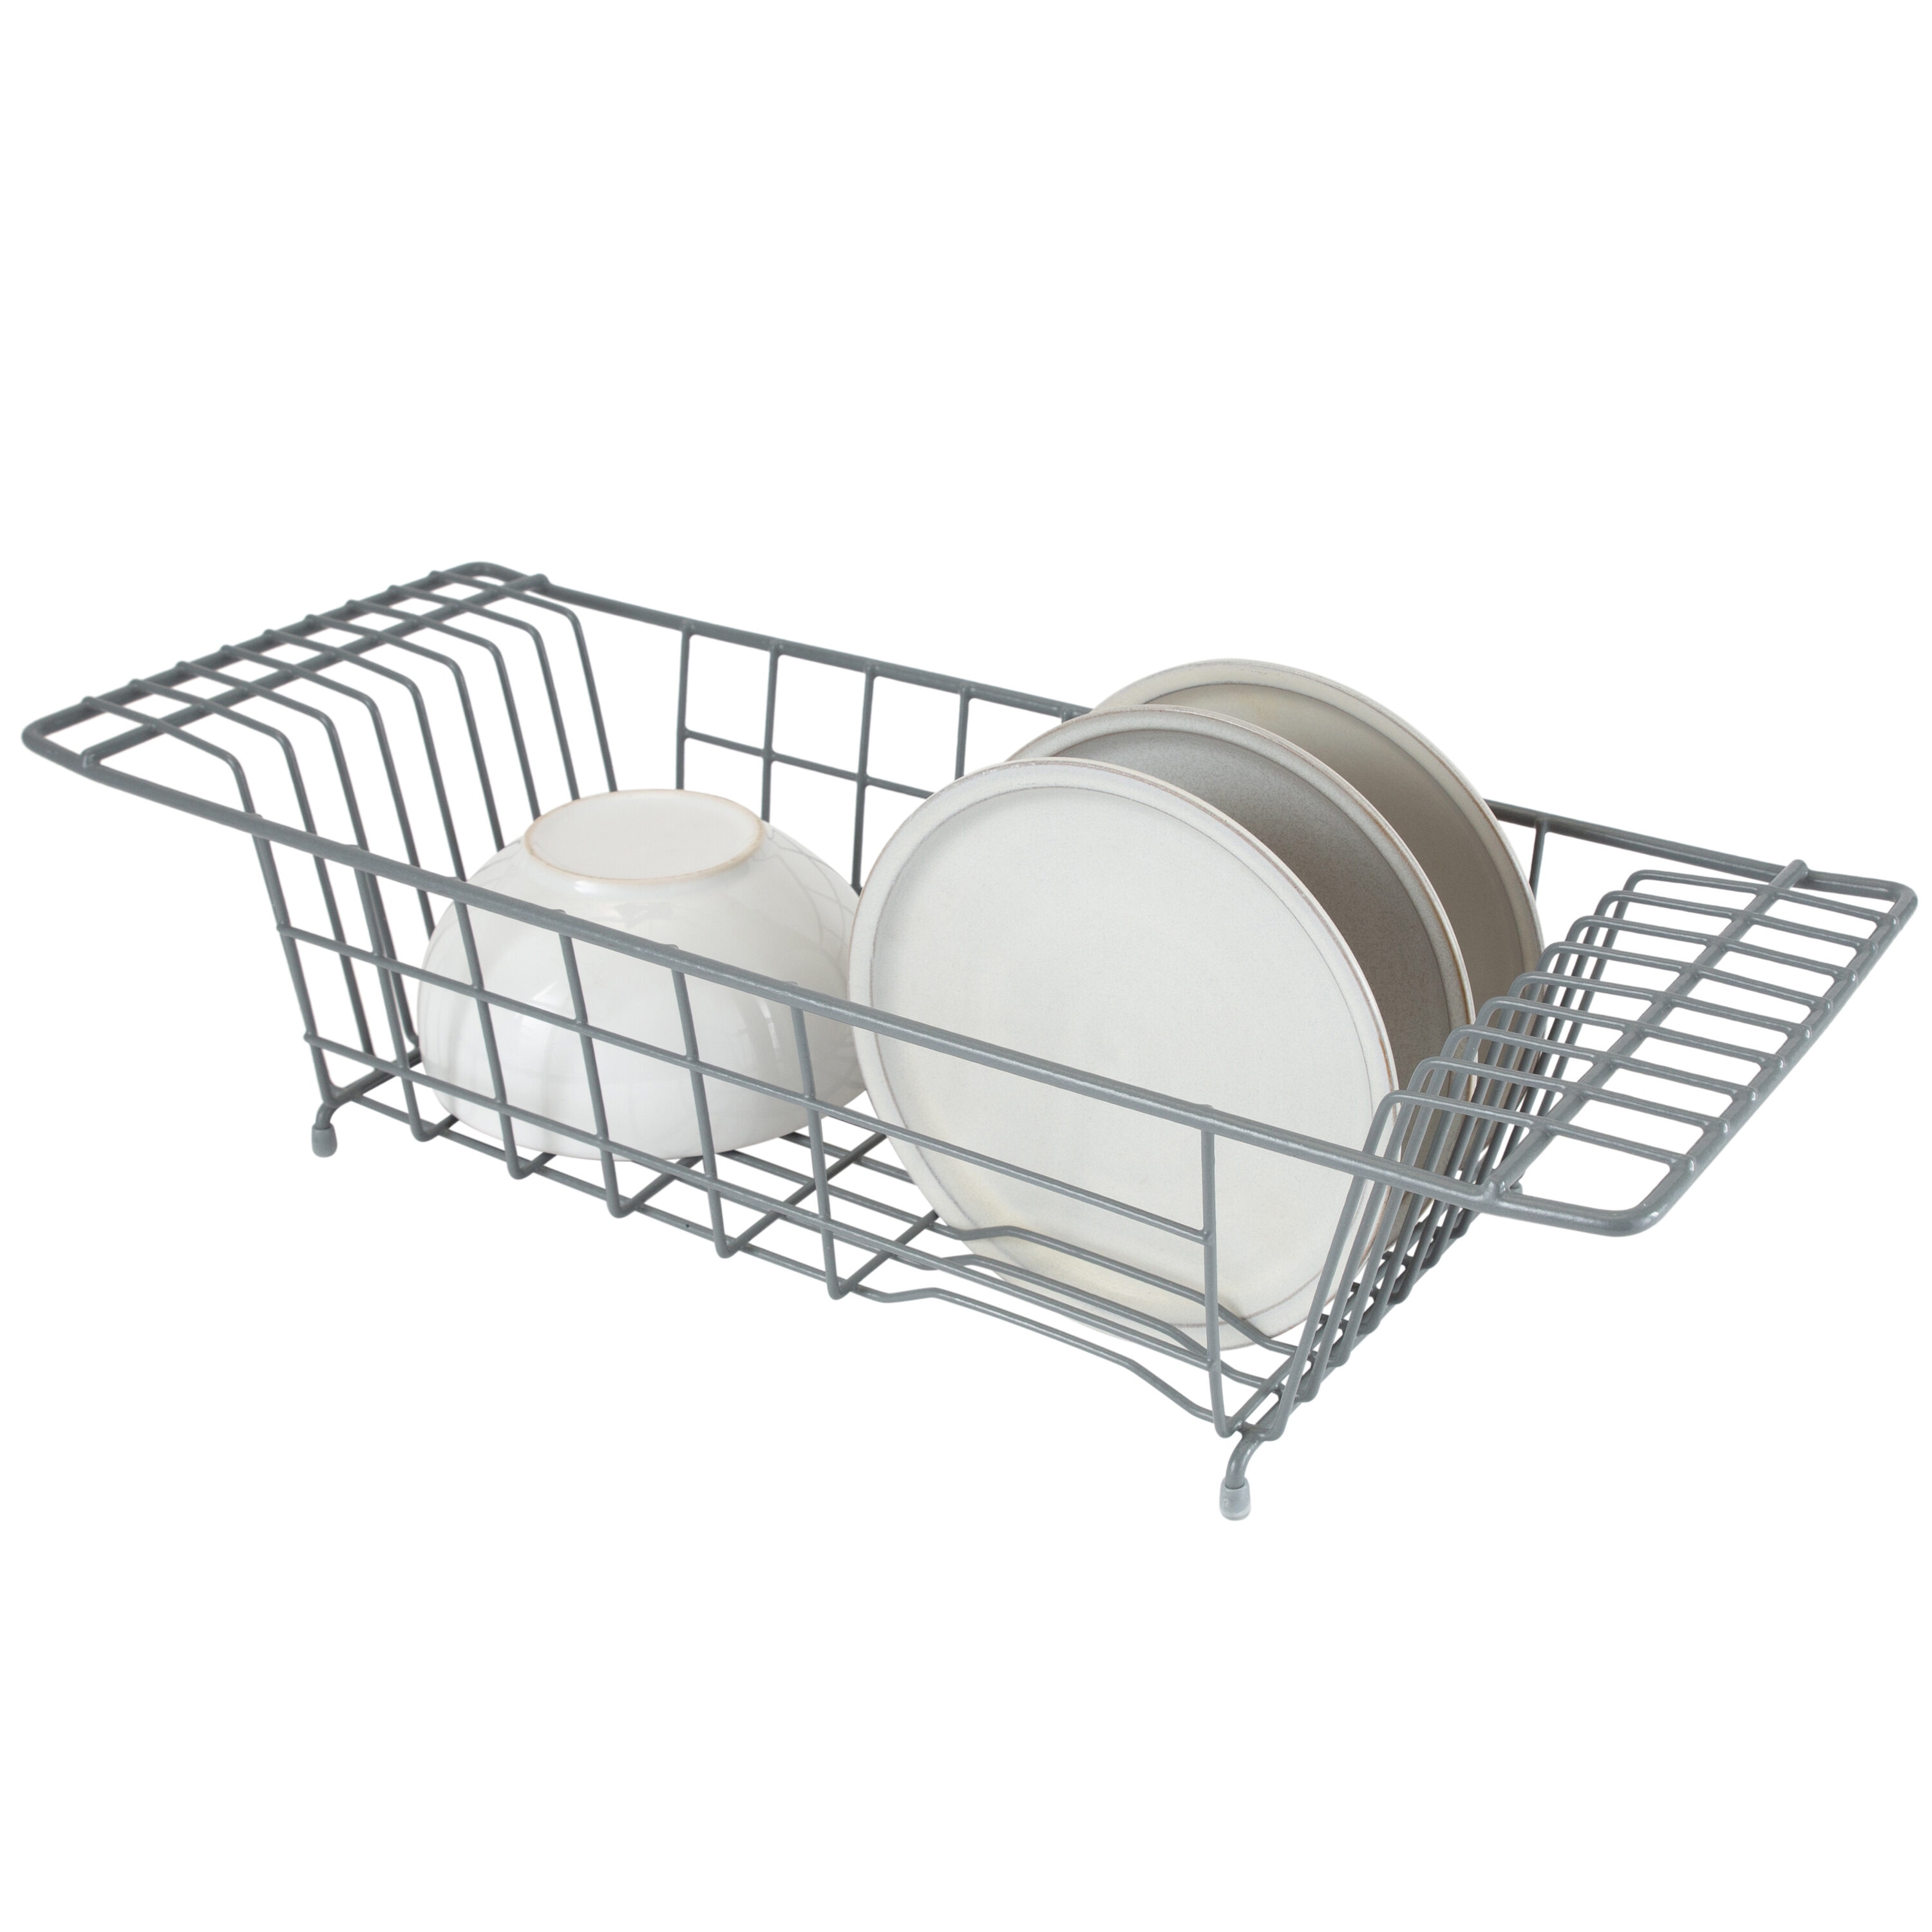 Classic 2 Tier Stainless Steel Dish Drainer Drying Rack Dish Rack